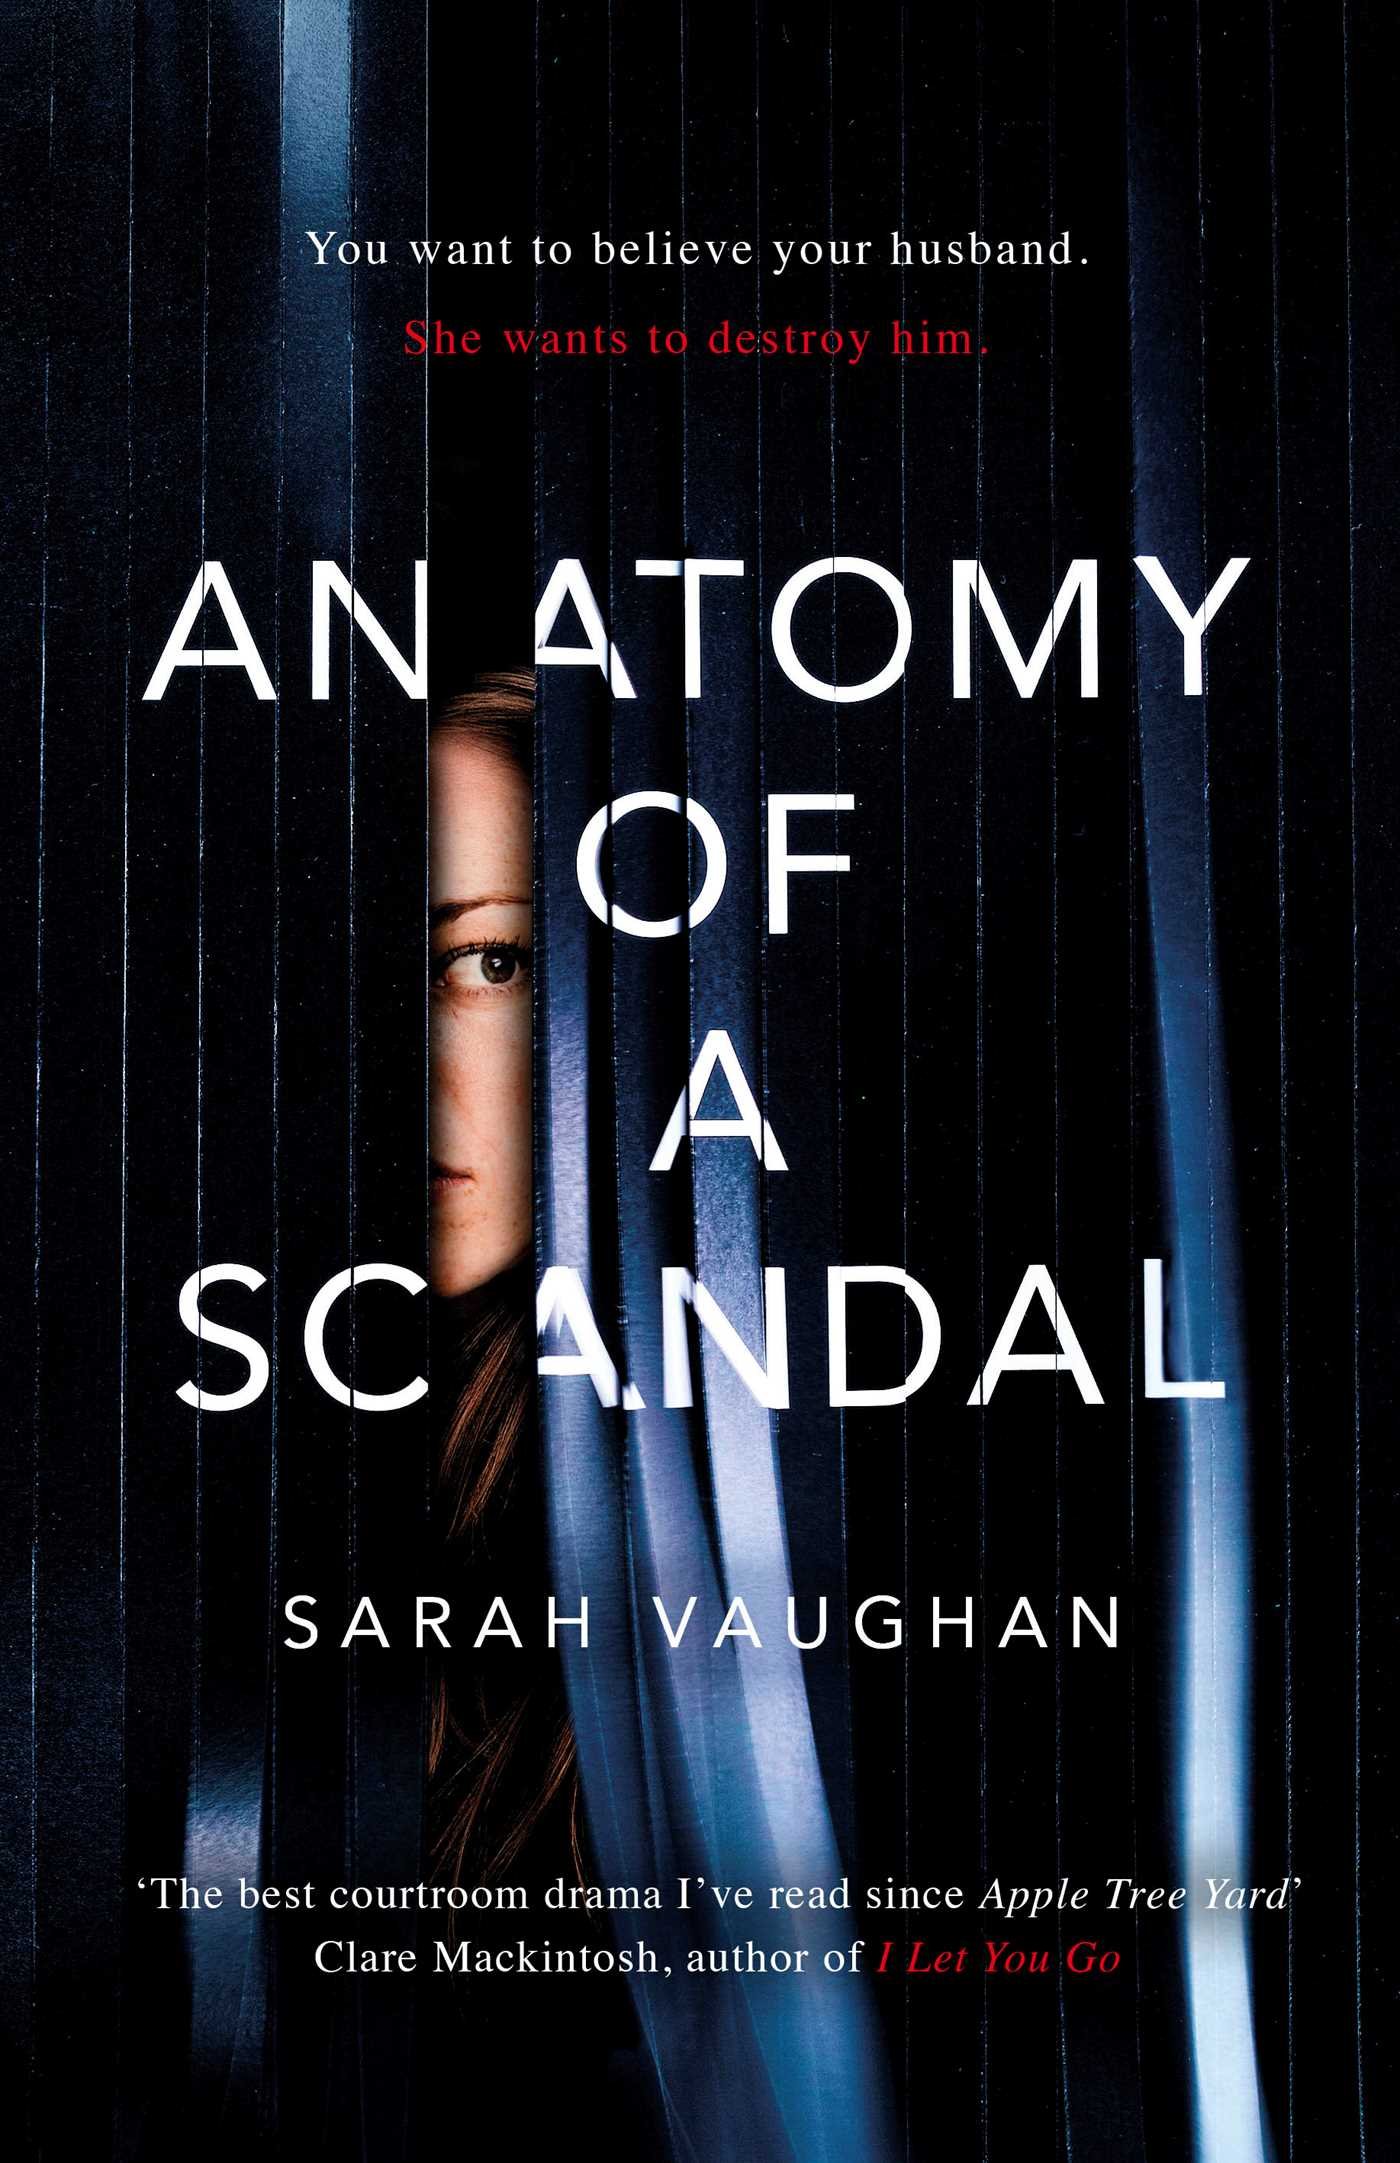 Image for "Anatomy of a Scandal"